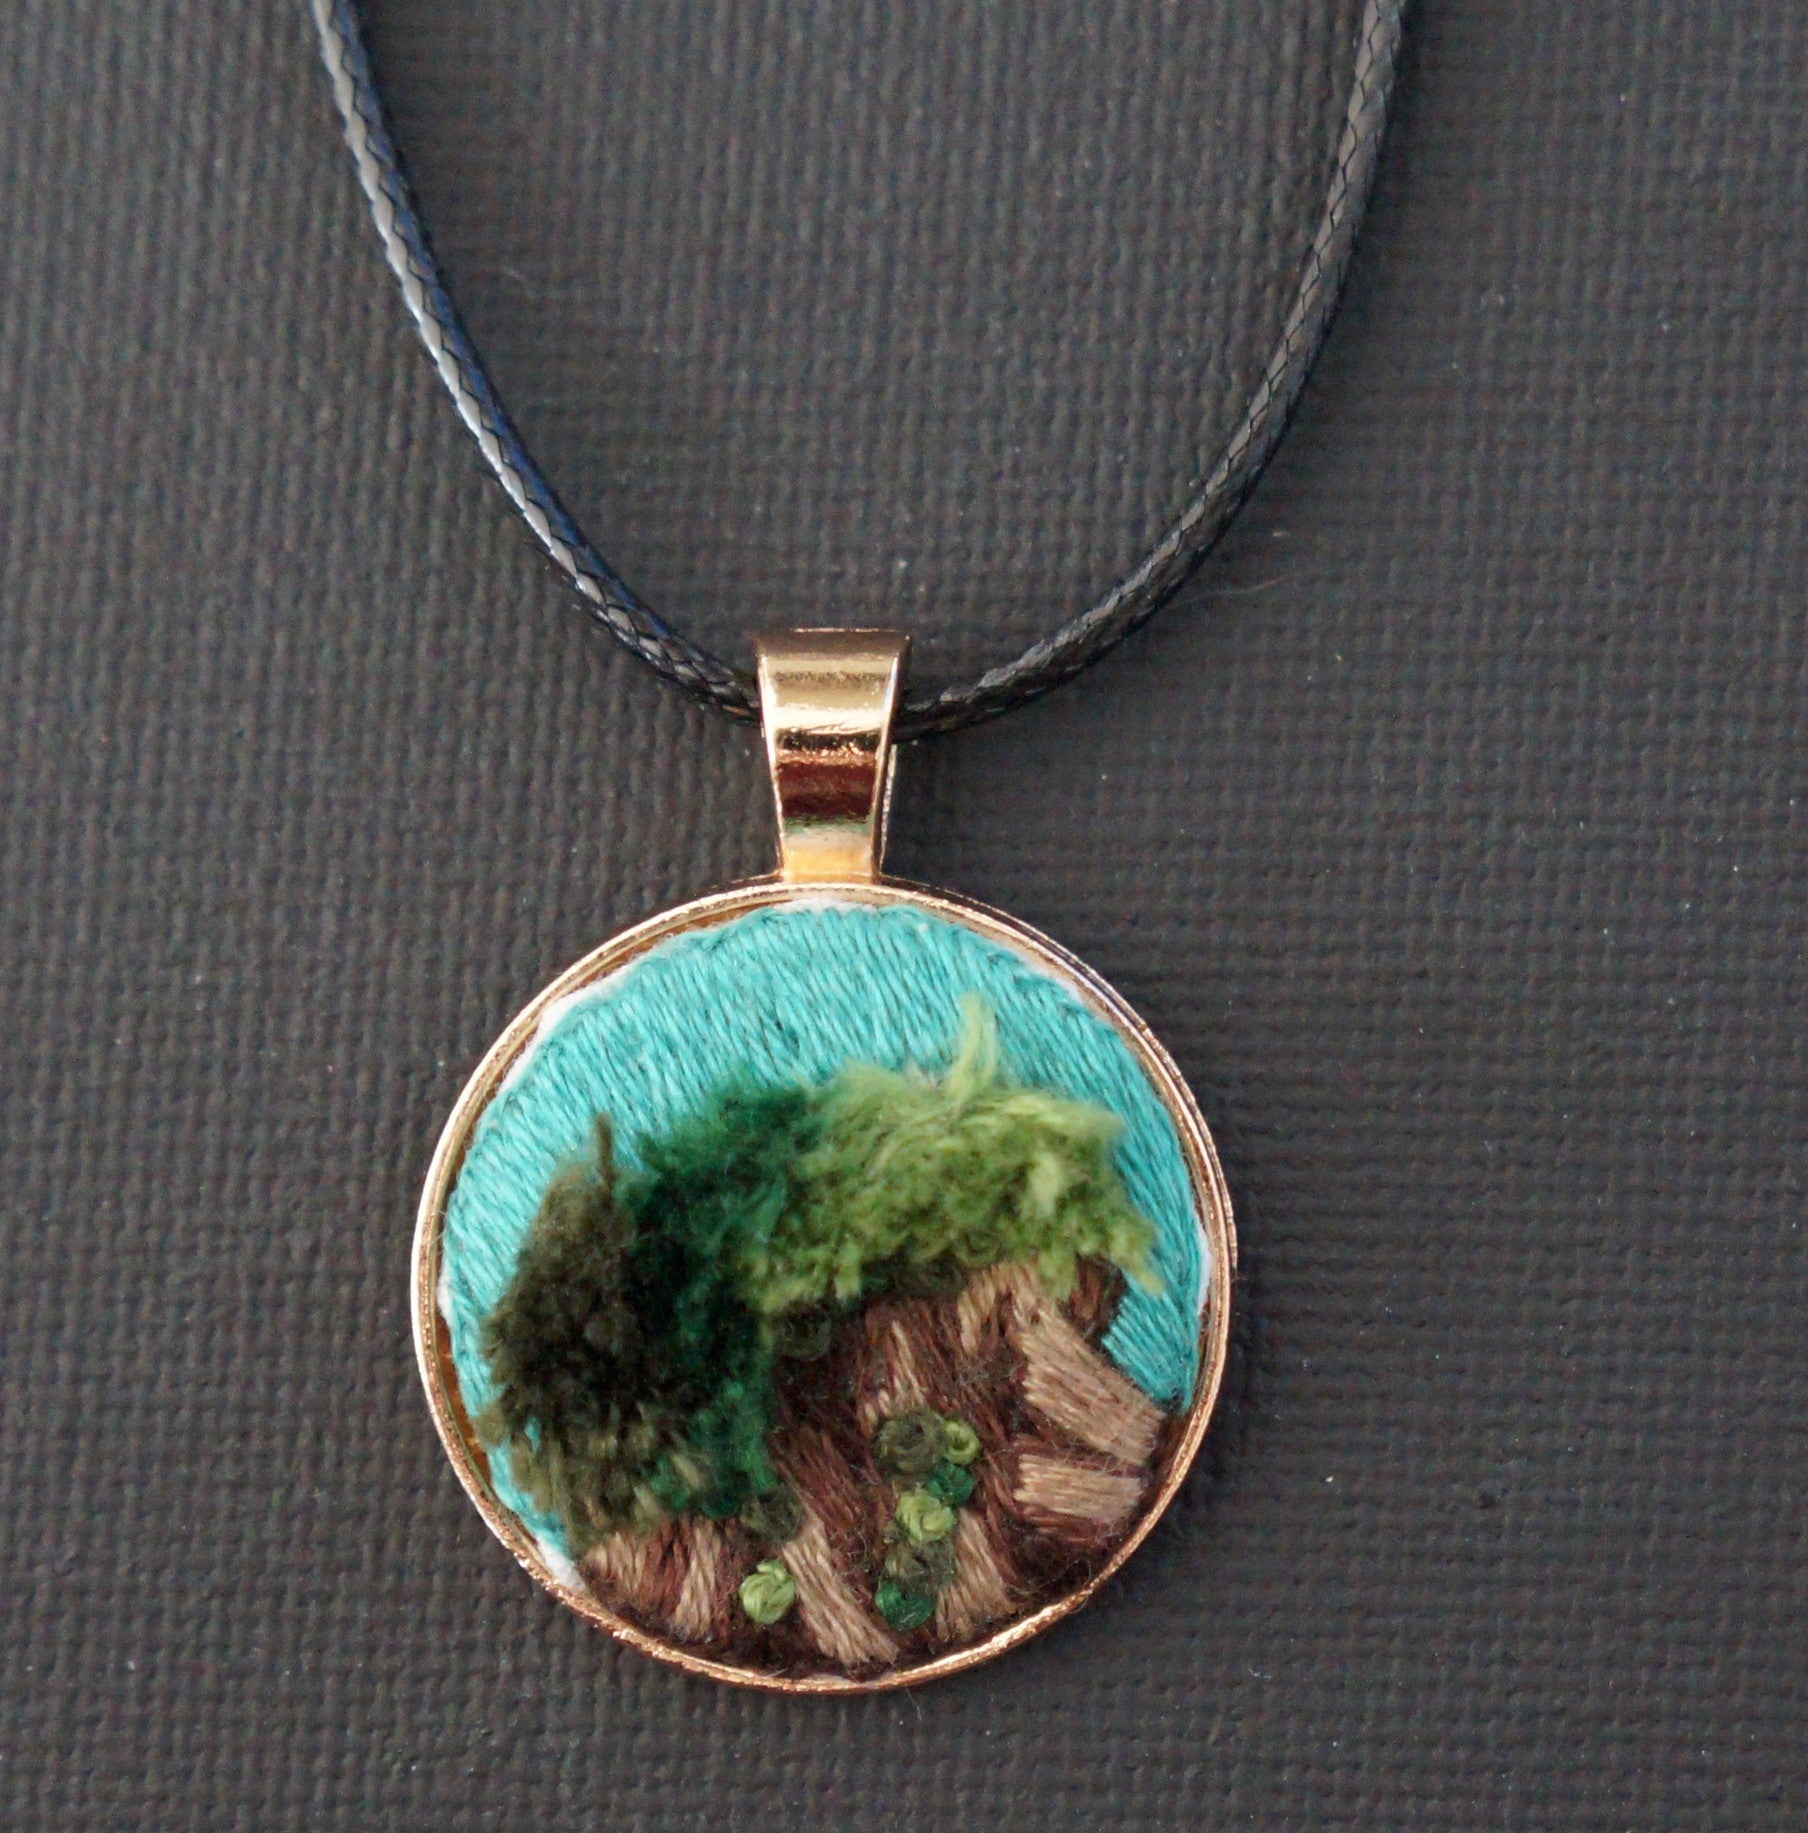 an embroidered pendant featuring a mossy stump. The moss is done in textured green turkey work.